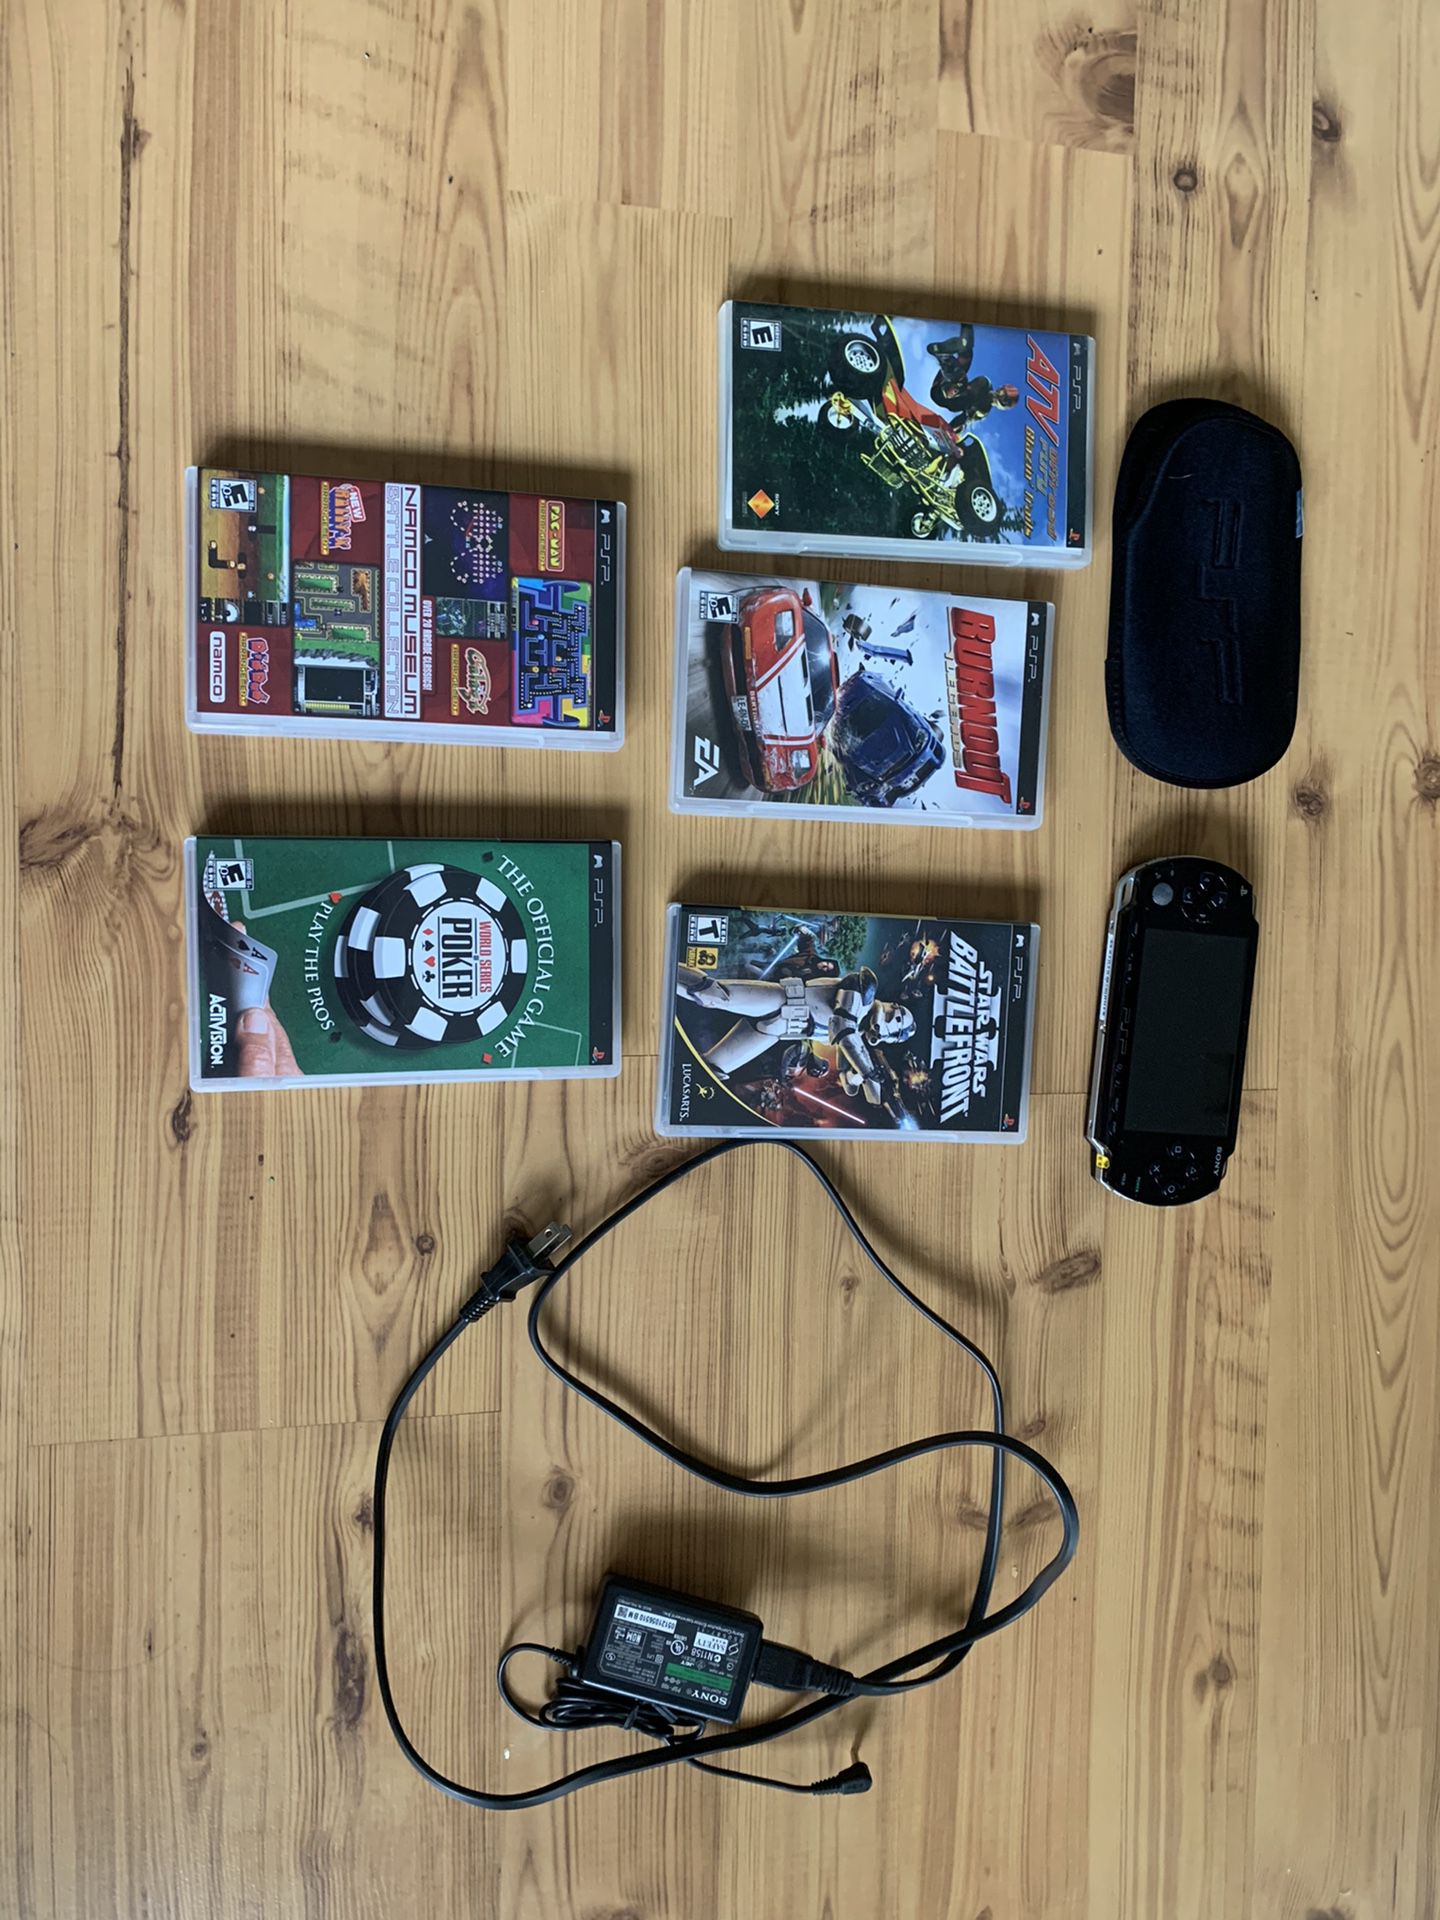 SONY PSP video game system with games!